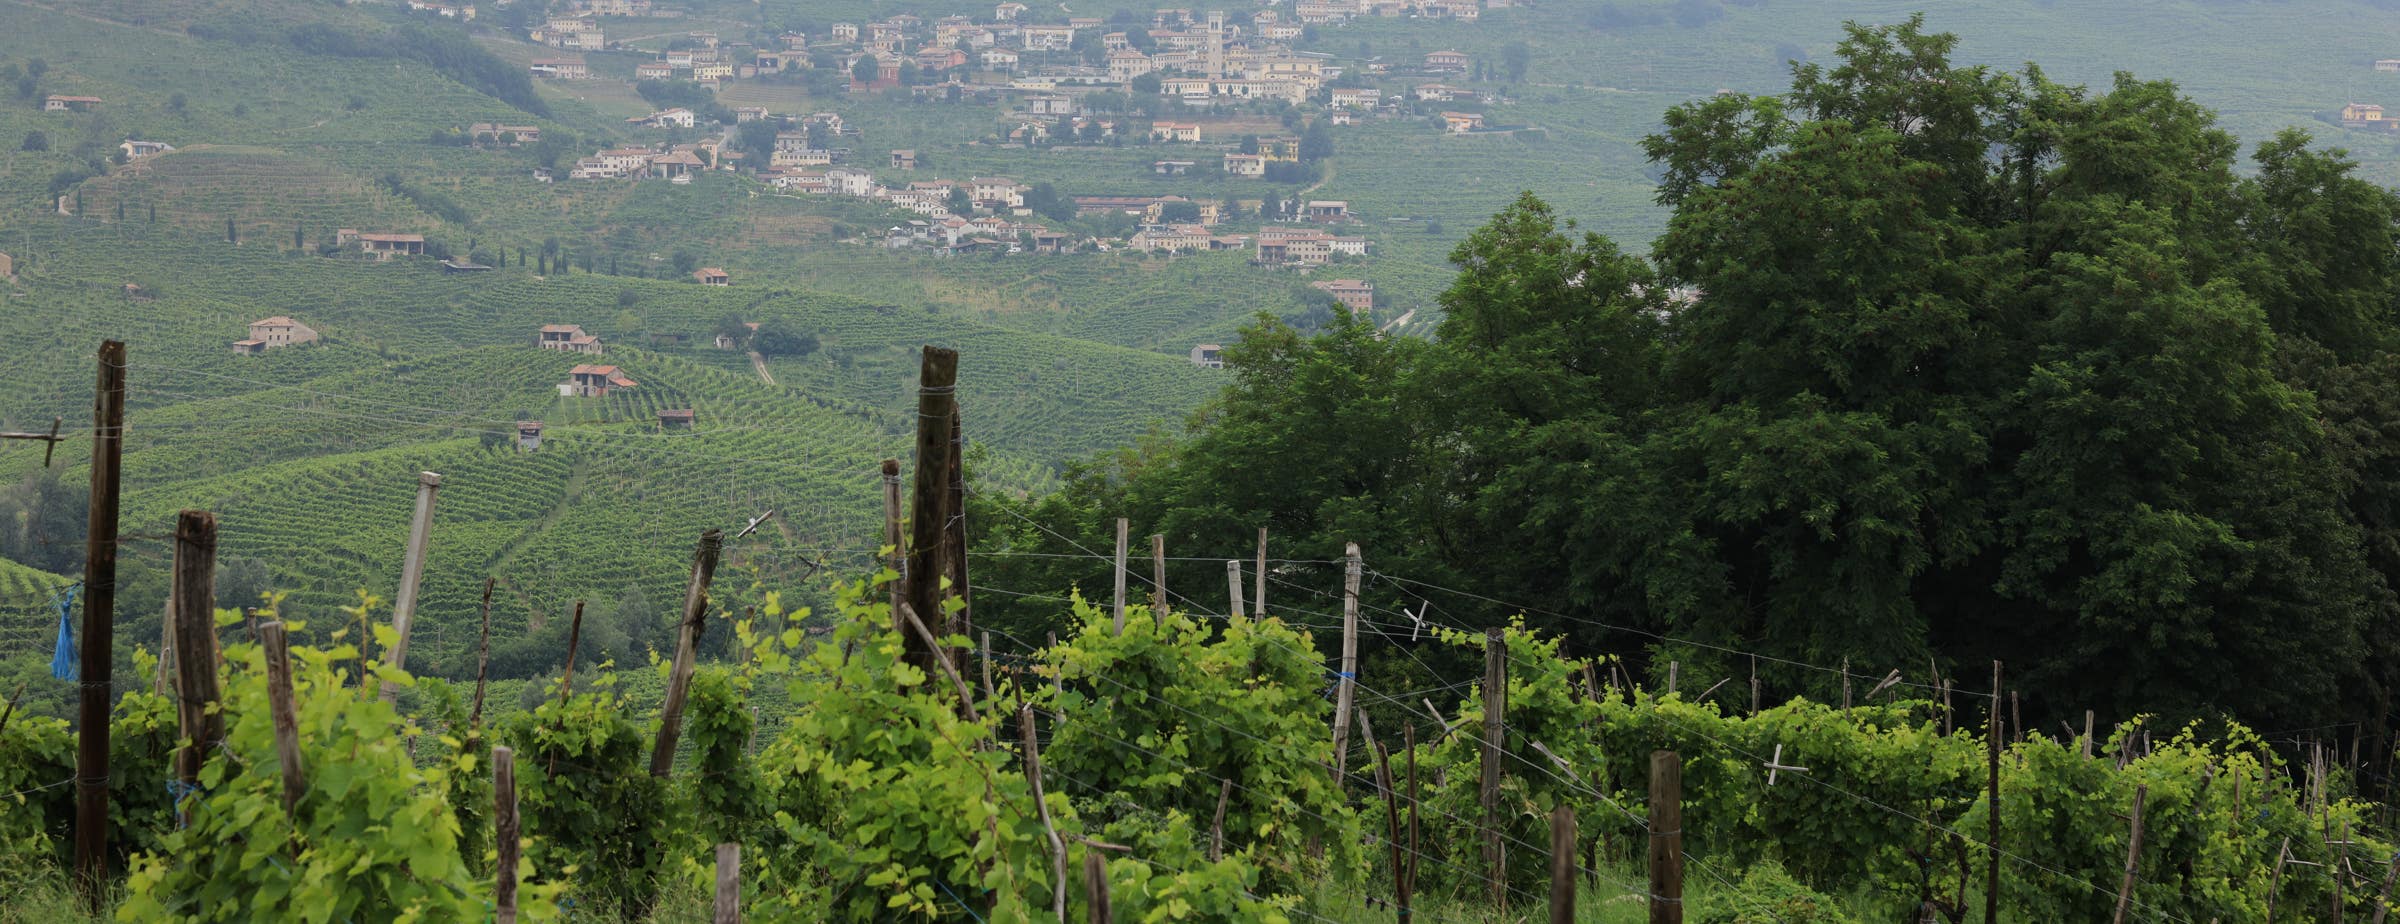 View from a vineyard showing close grapevines in the front and more vineyards and a small village in the distance. 